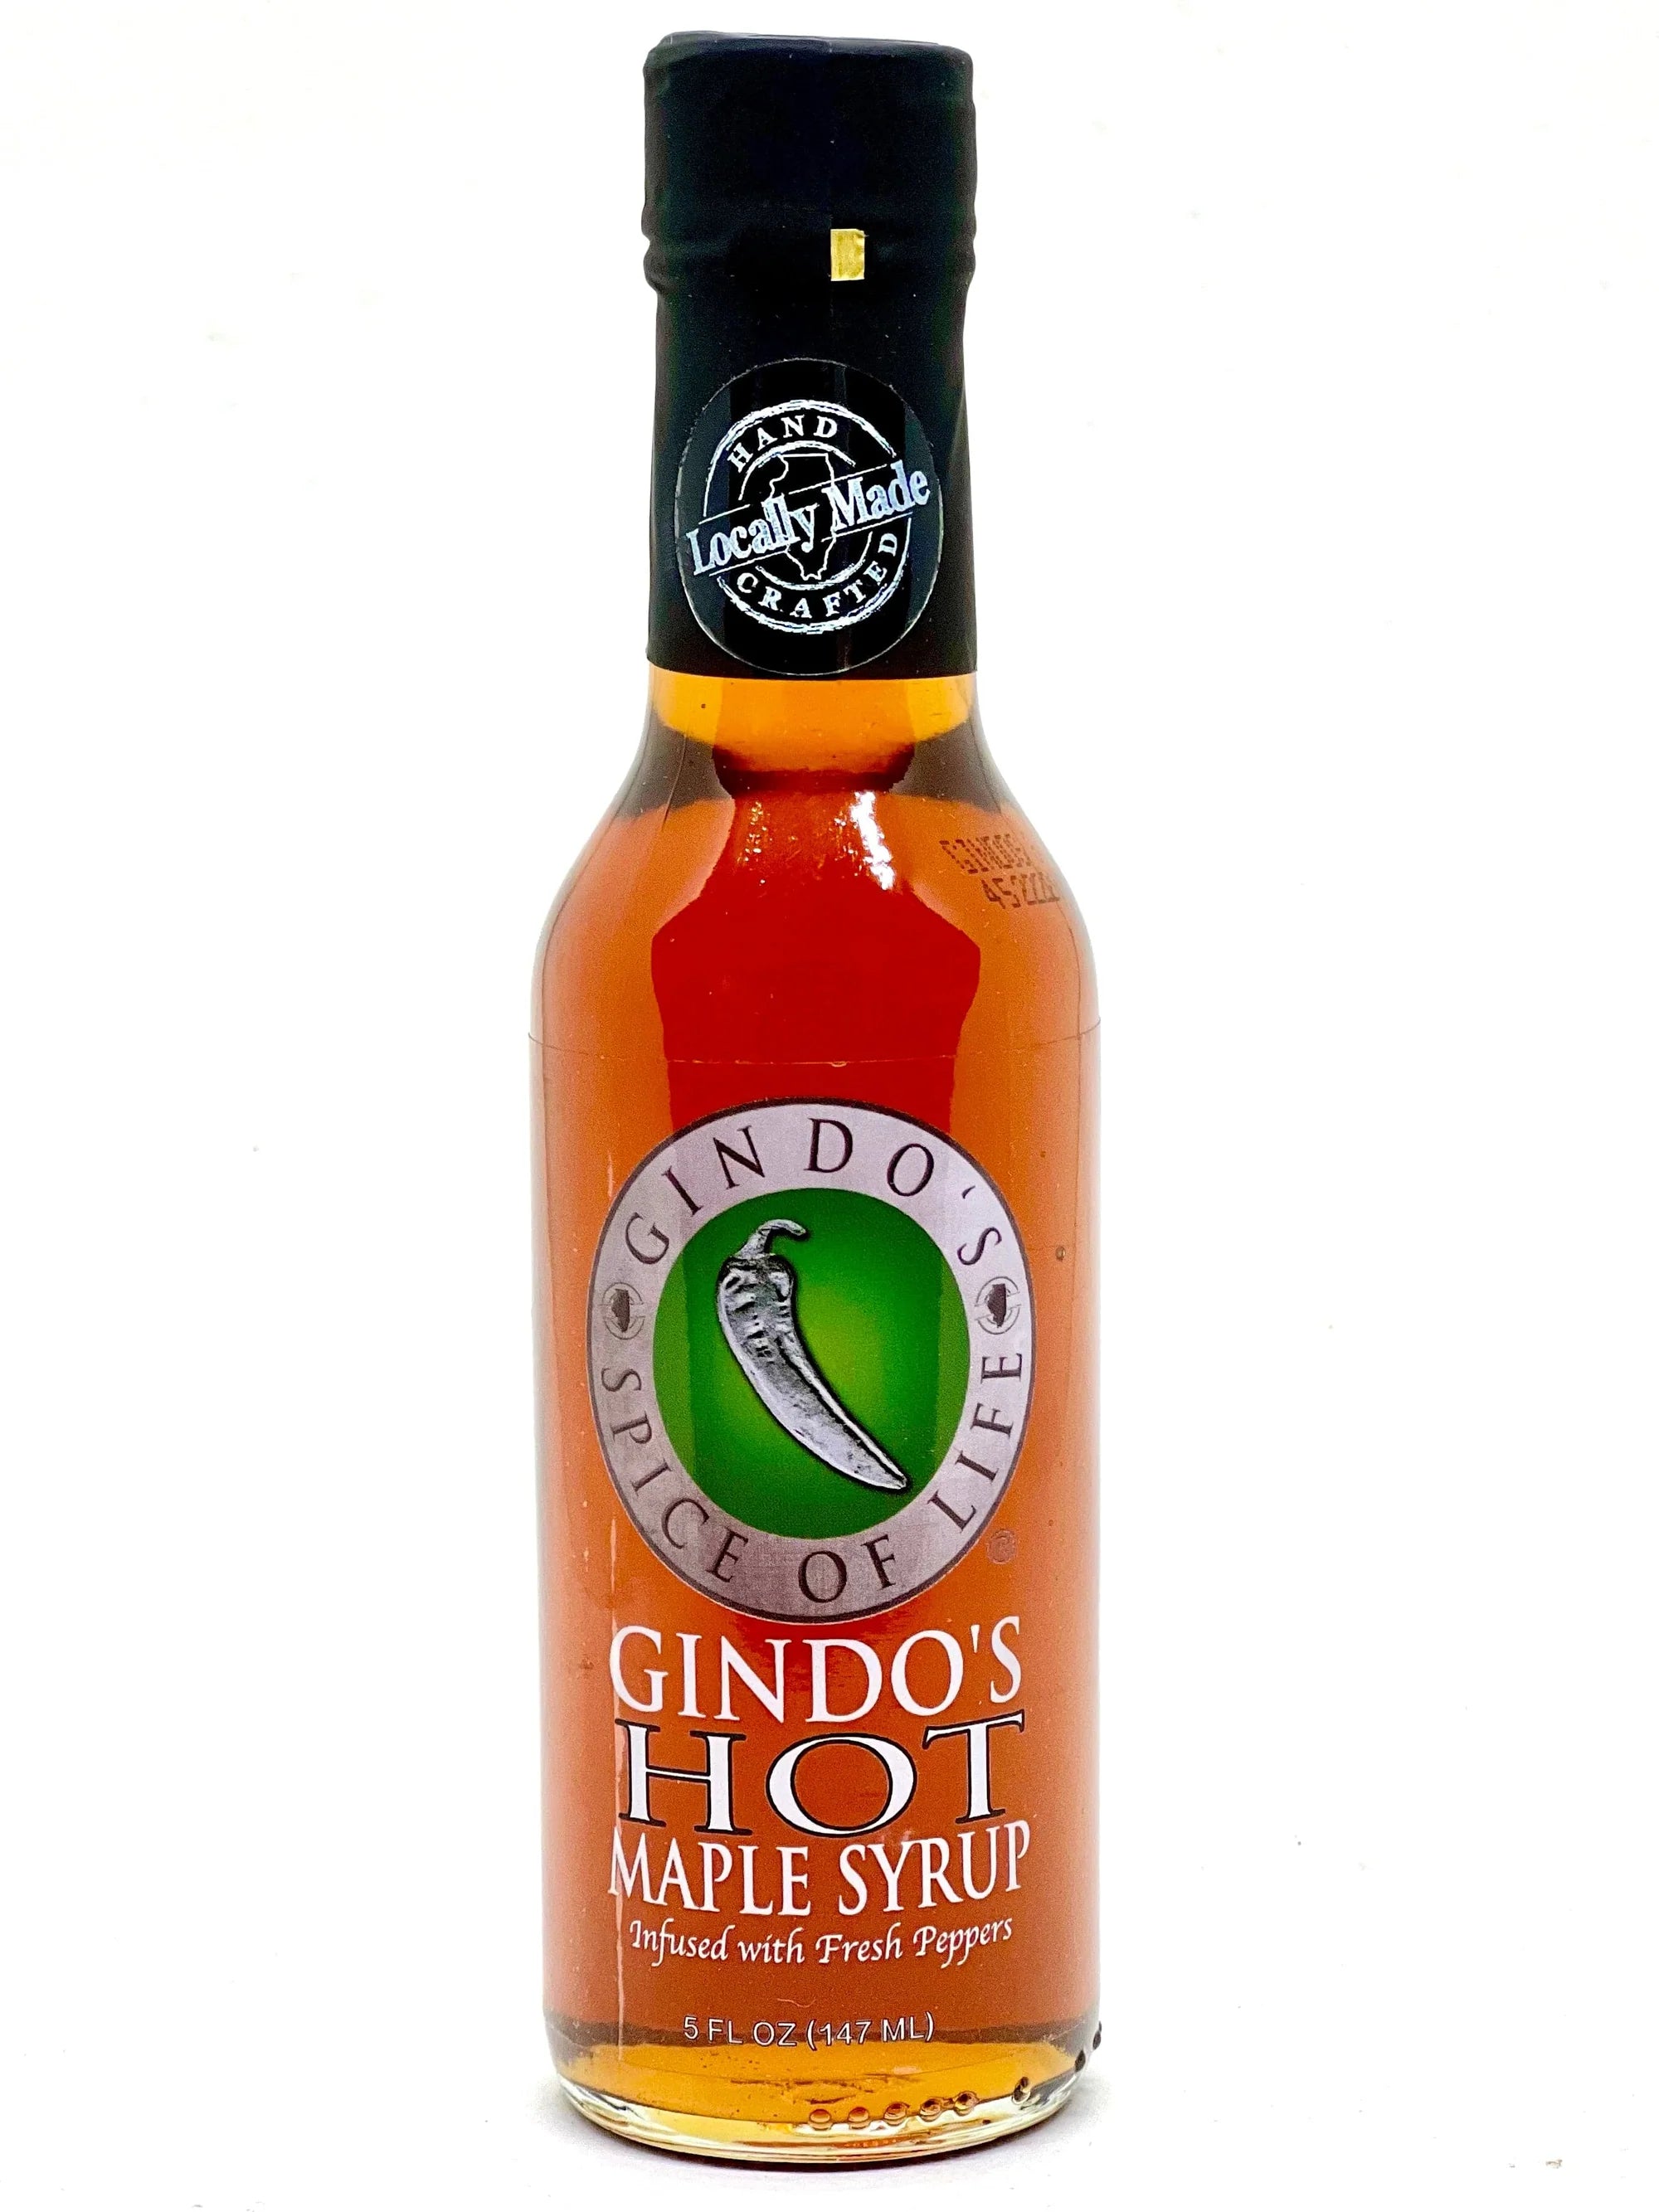 Gindo's Hot Maple Syrup